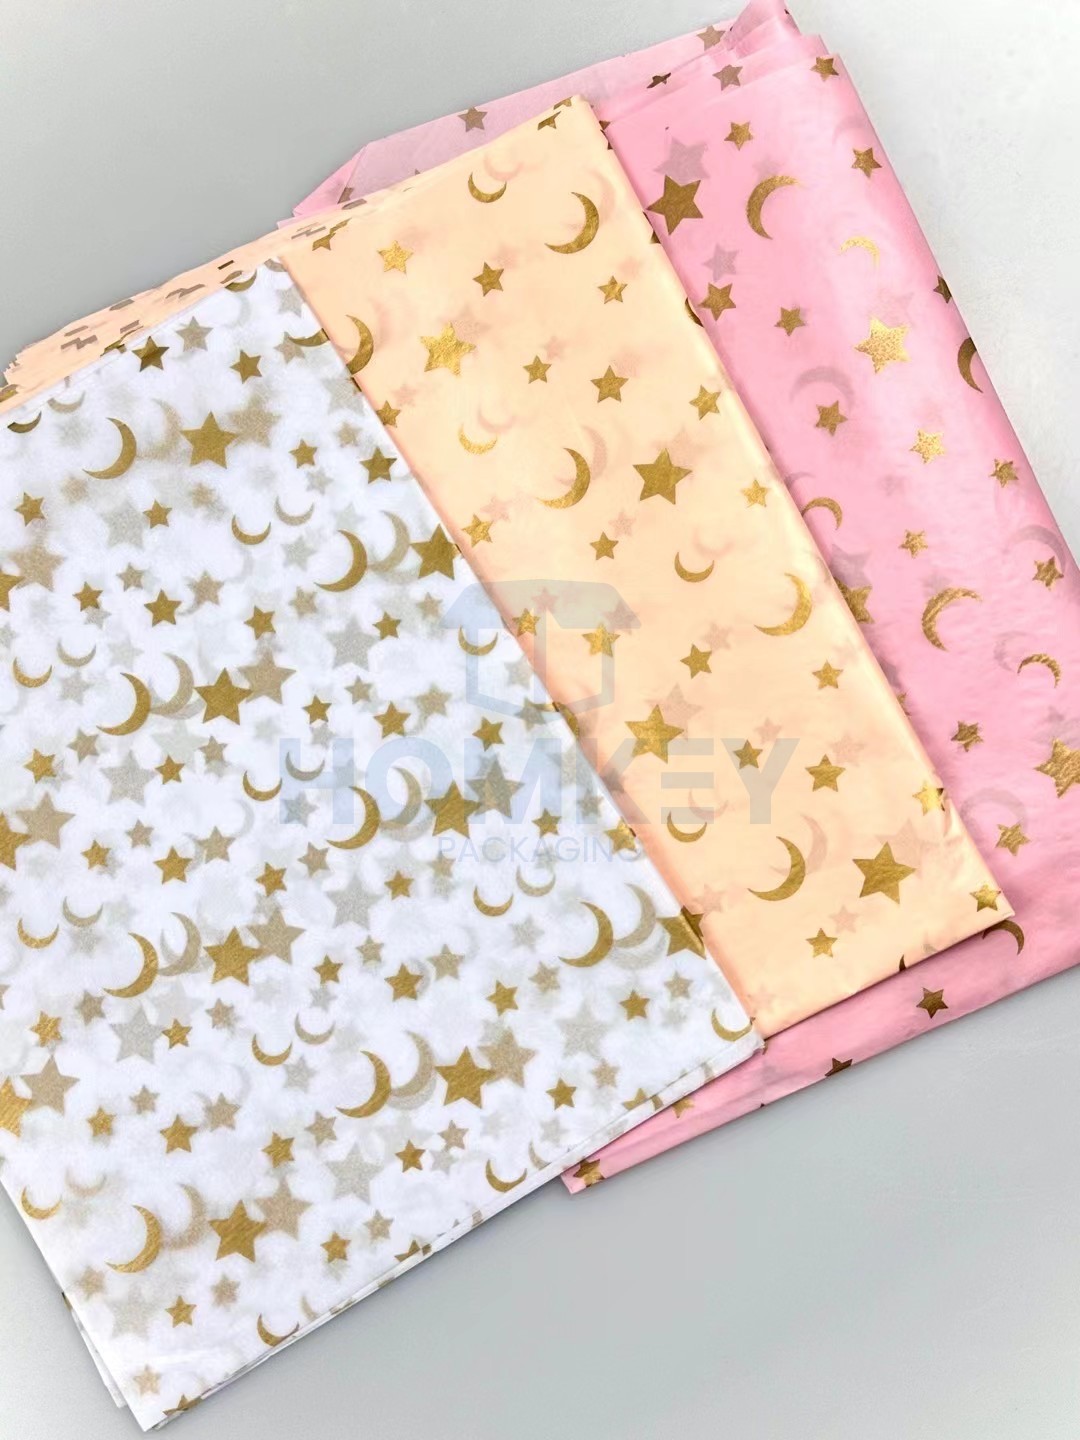 Tissue Paper & Wrapping Paper